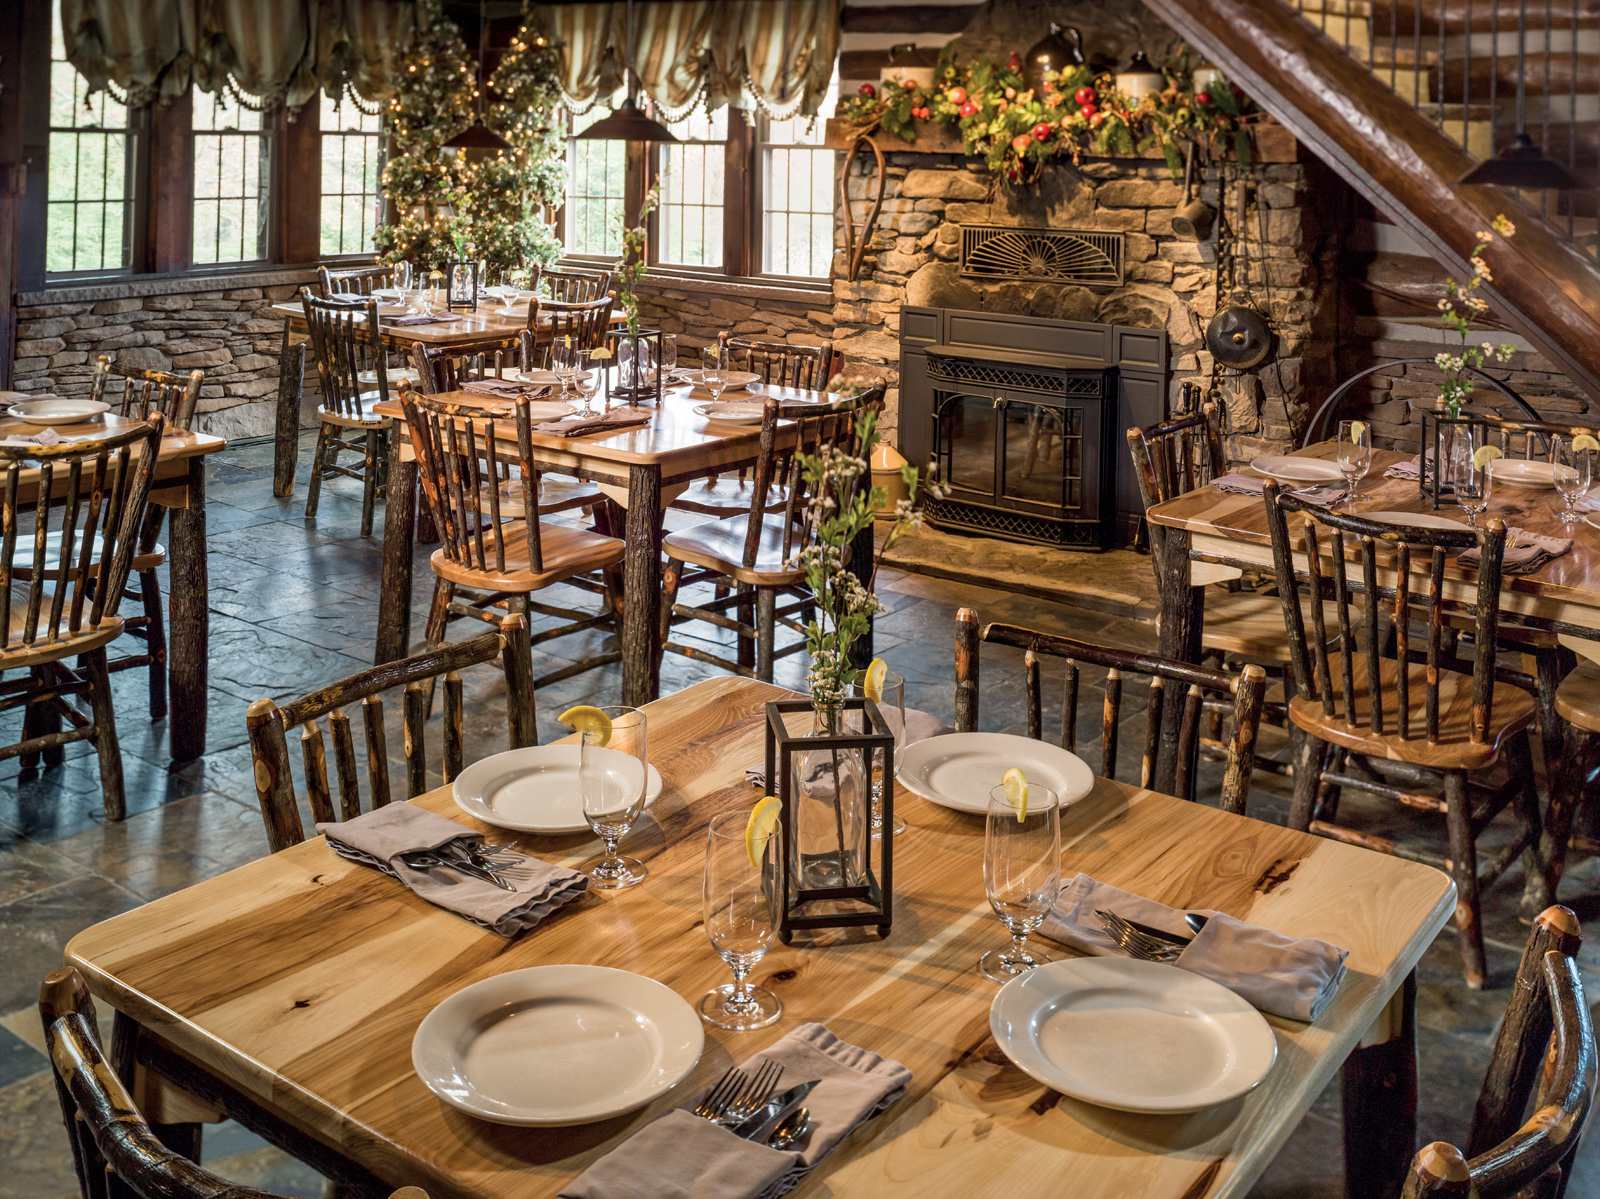 Hickory Collection Restaurant Setting with 5 tables and side chairs around a fireplace